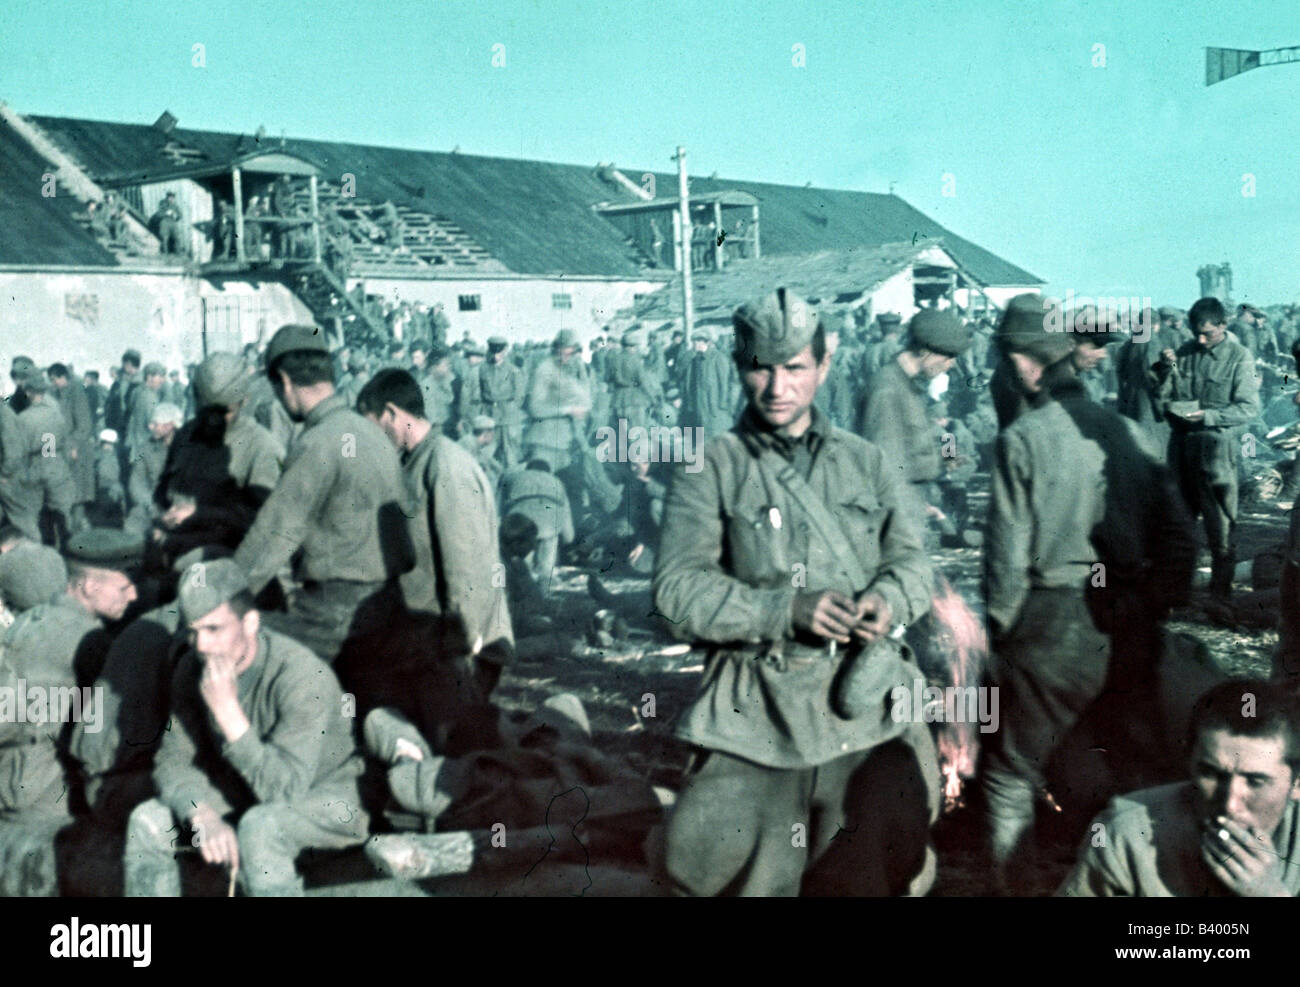 events, Second World War / WWII, Russia 1941, captured Soviet soldiers after the Battle of Uman, Ukraine, 10.8.1941, Stock Photo